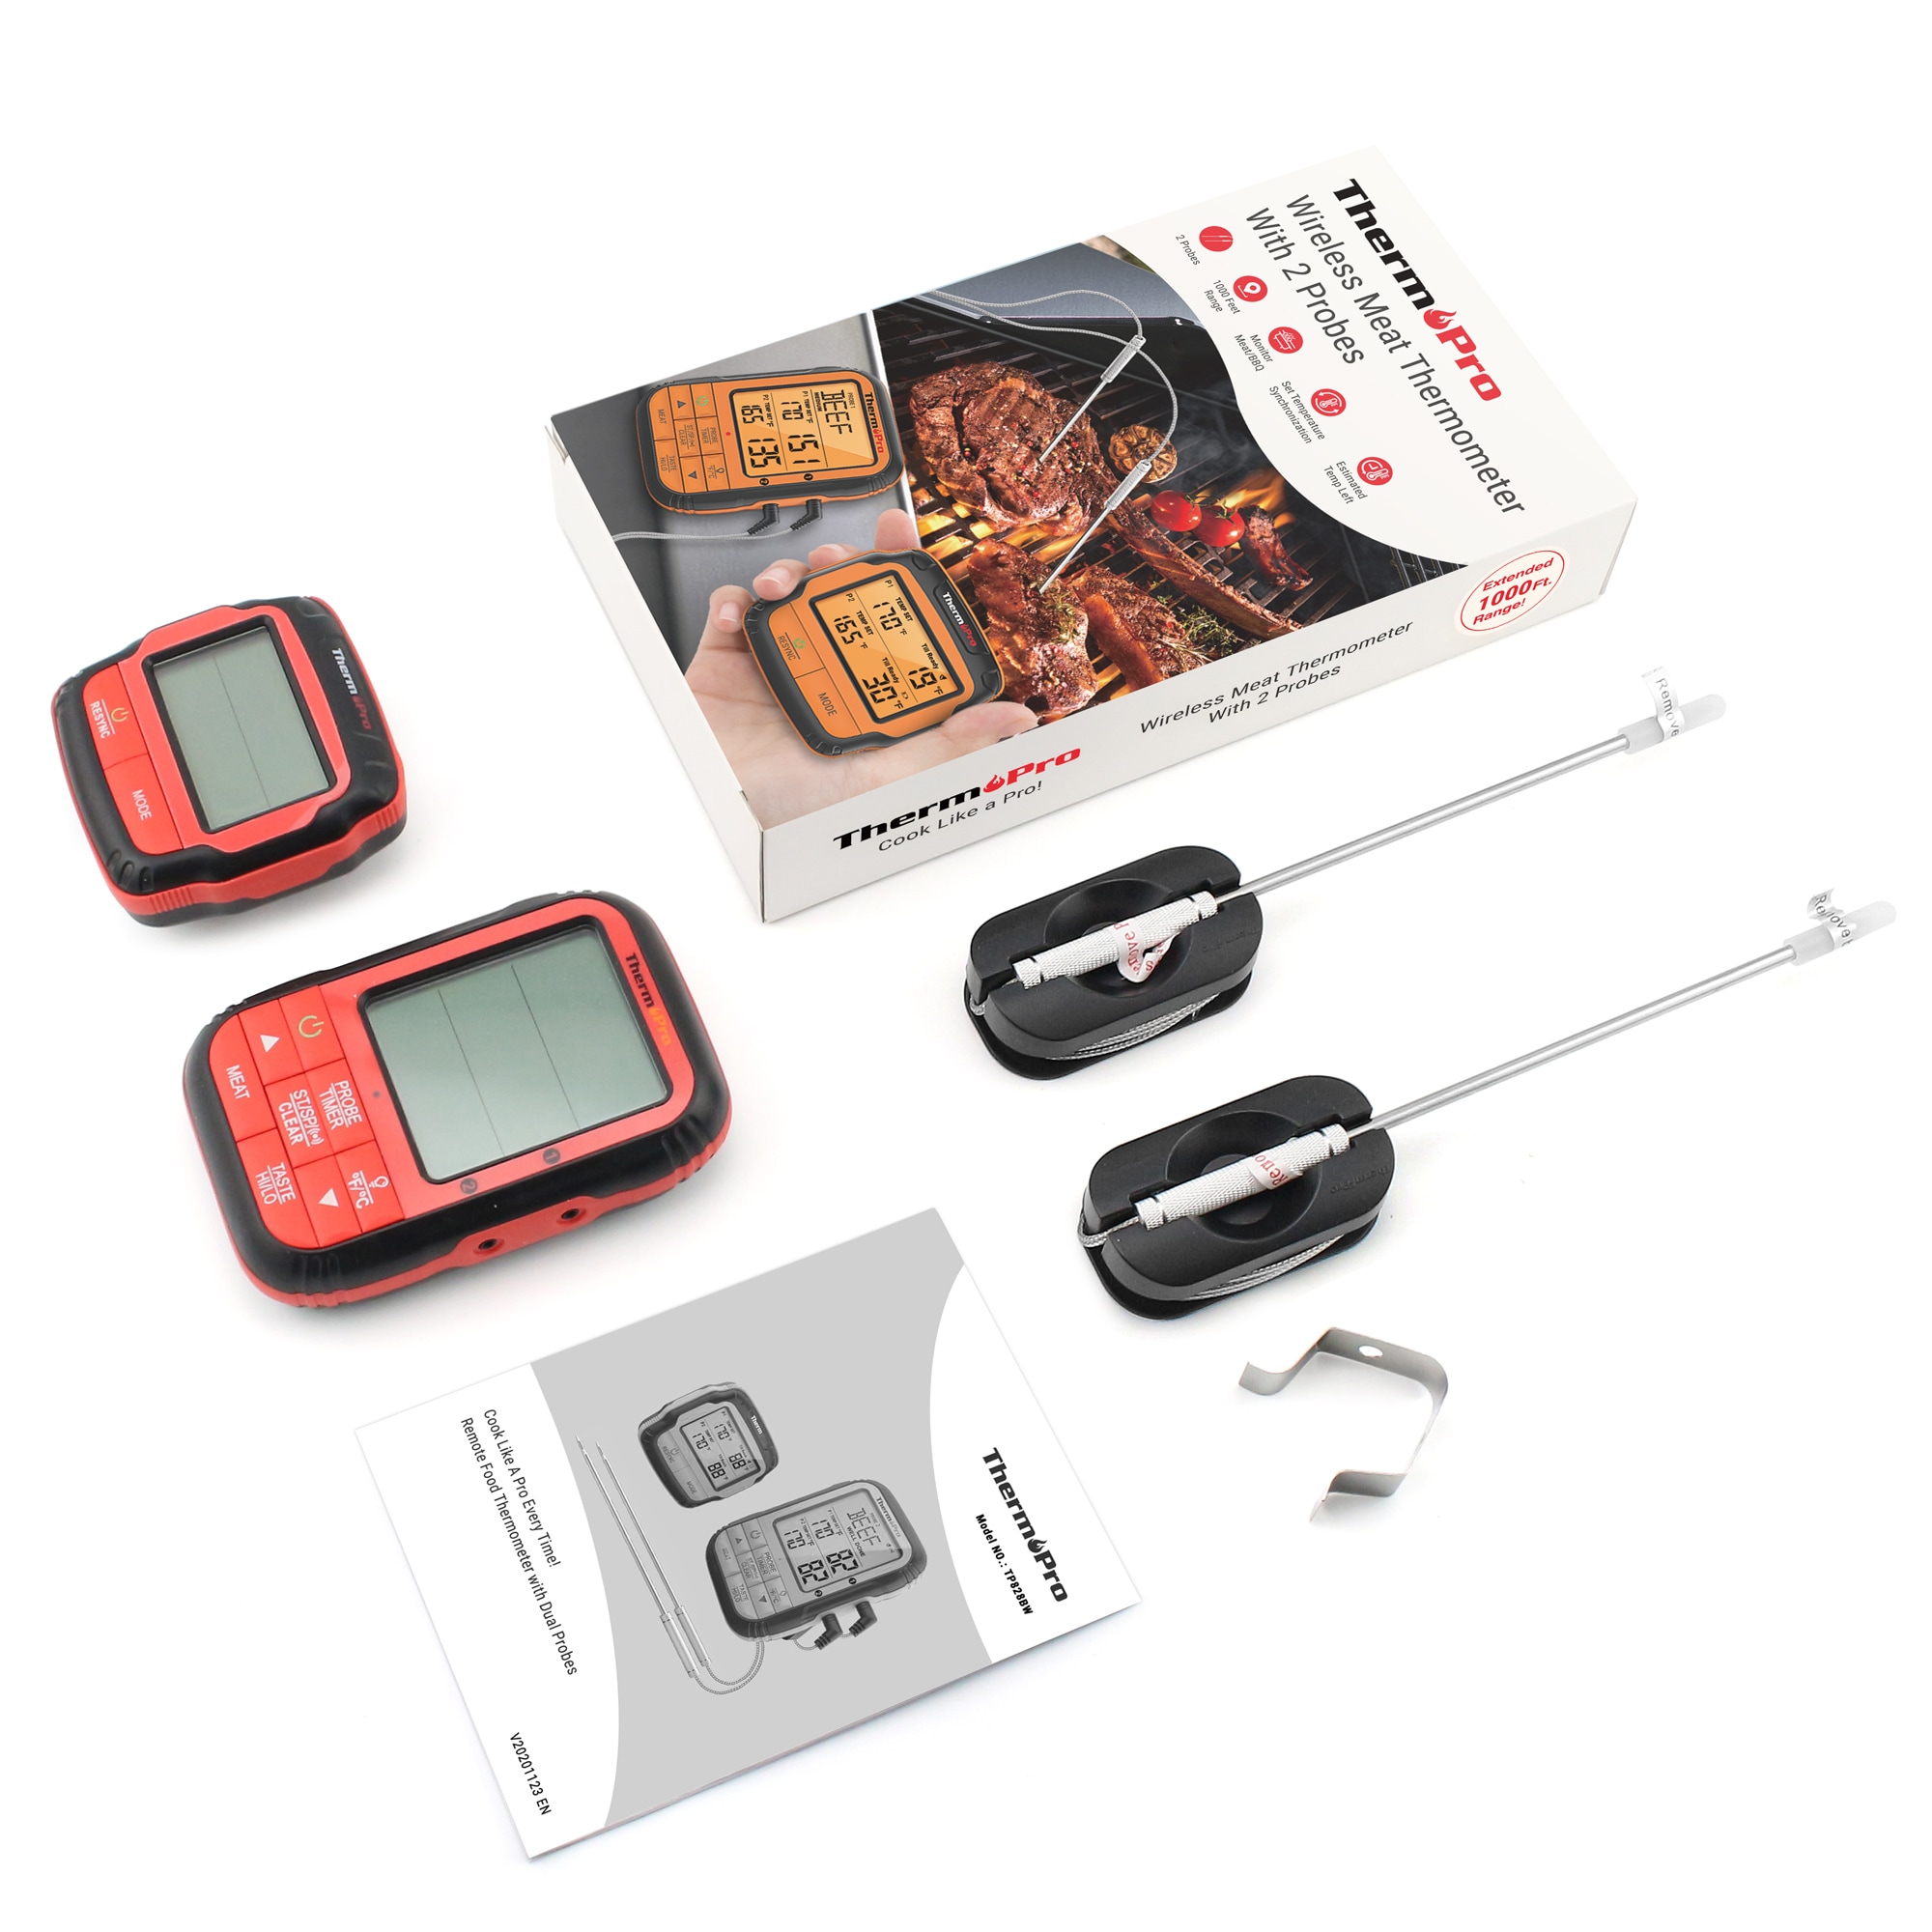 ThermoPro TP828W Digital Leave-in Meat Thermometer in the Meat Thermometers  department at